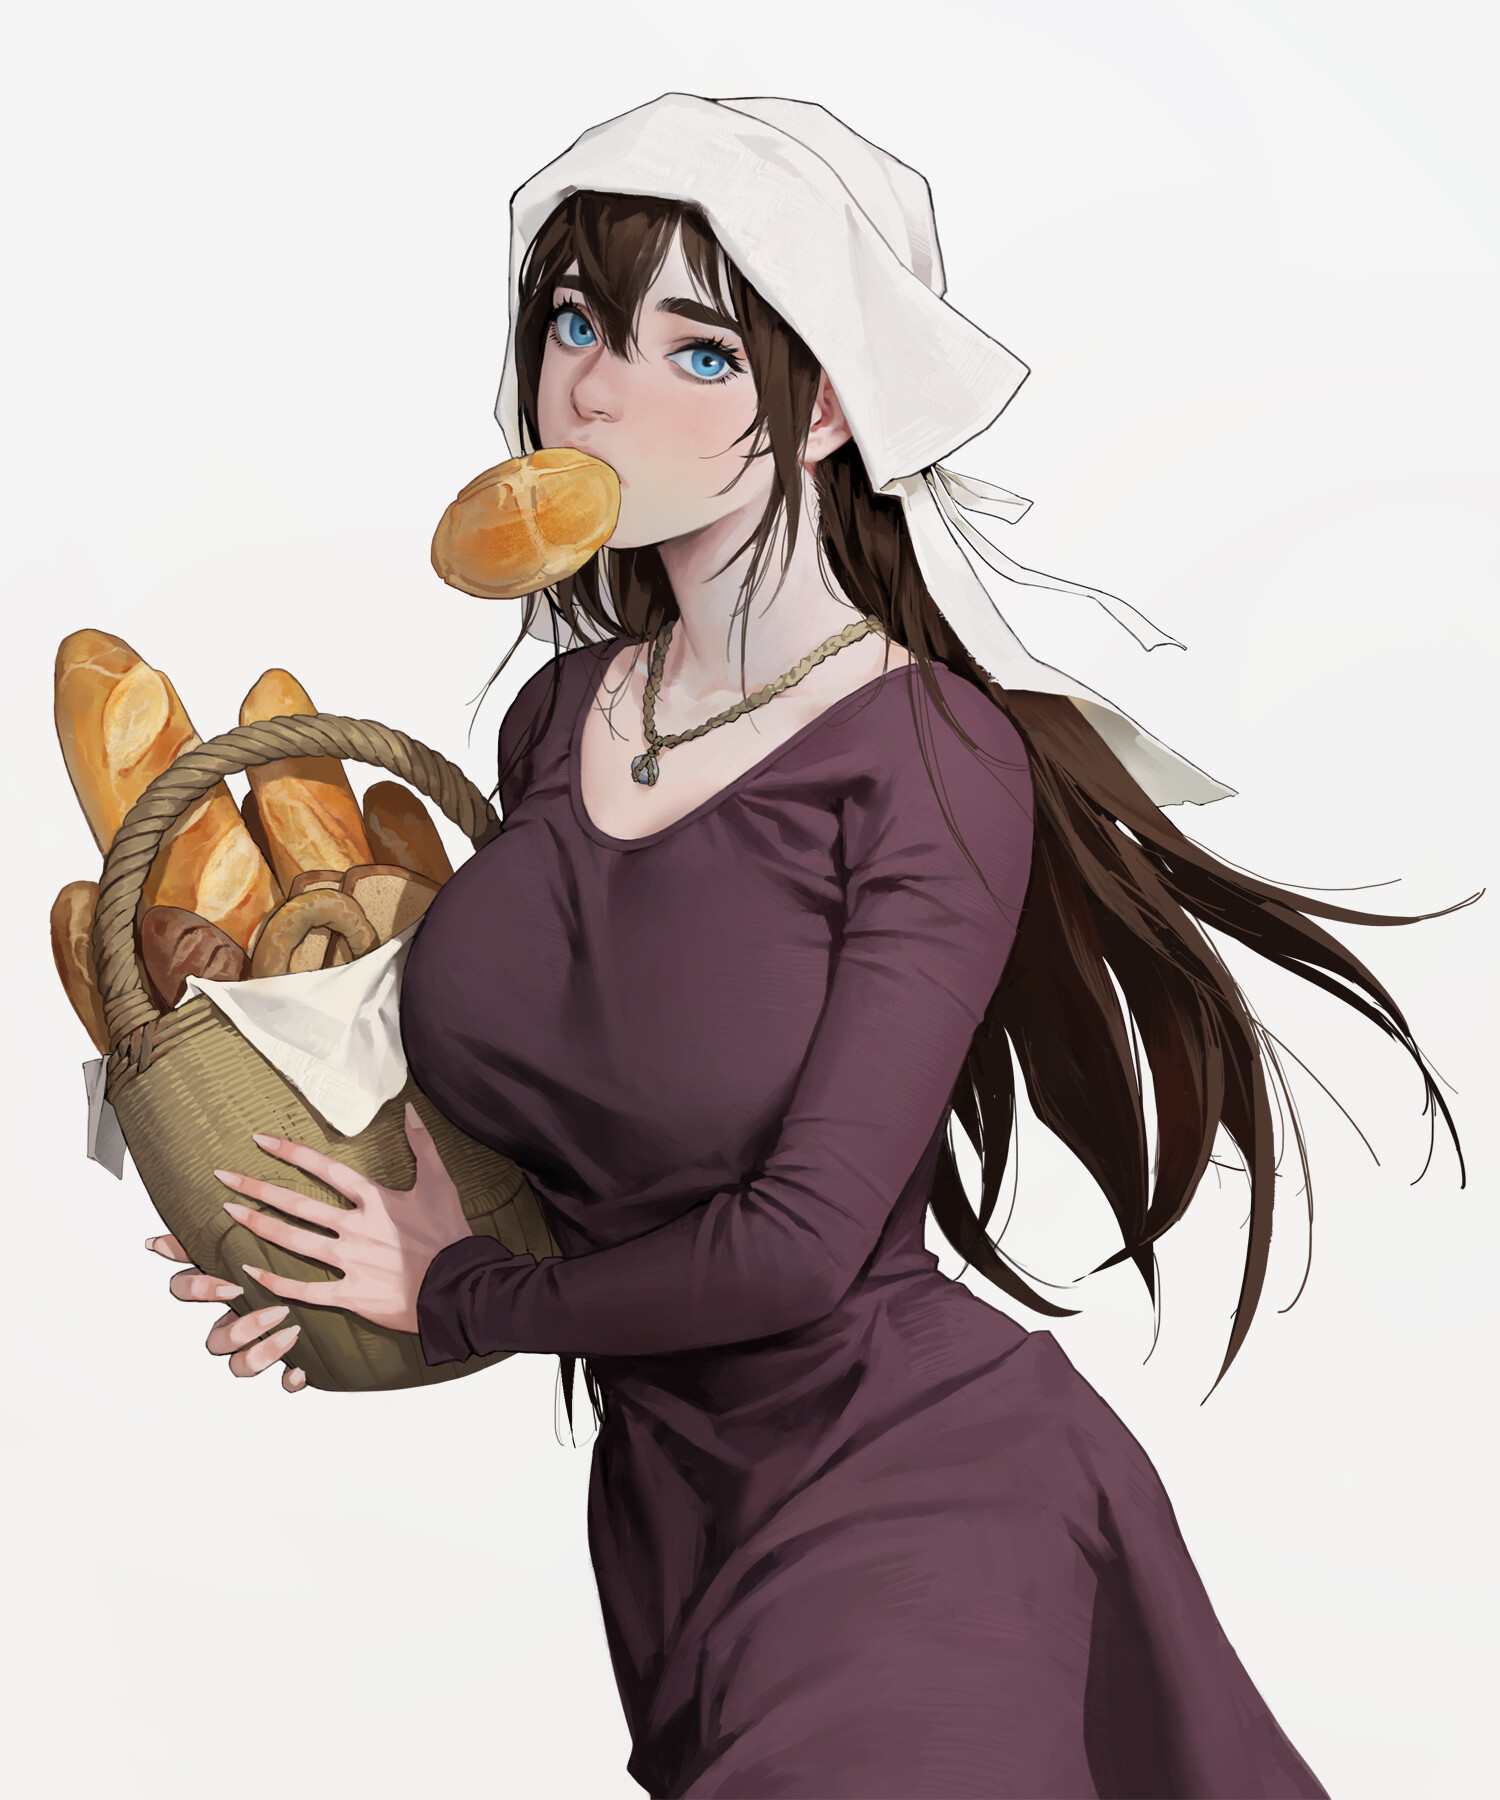 Portrait Display Simple Background Original Characters Anime Girls Anime Maid Baguette Bread 1500x1800